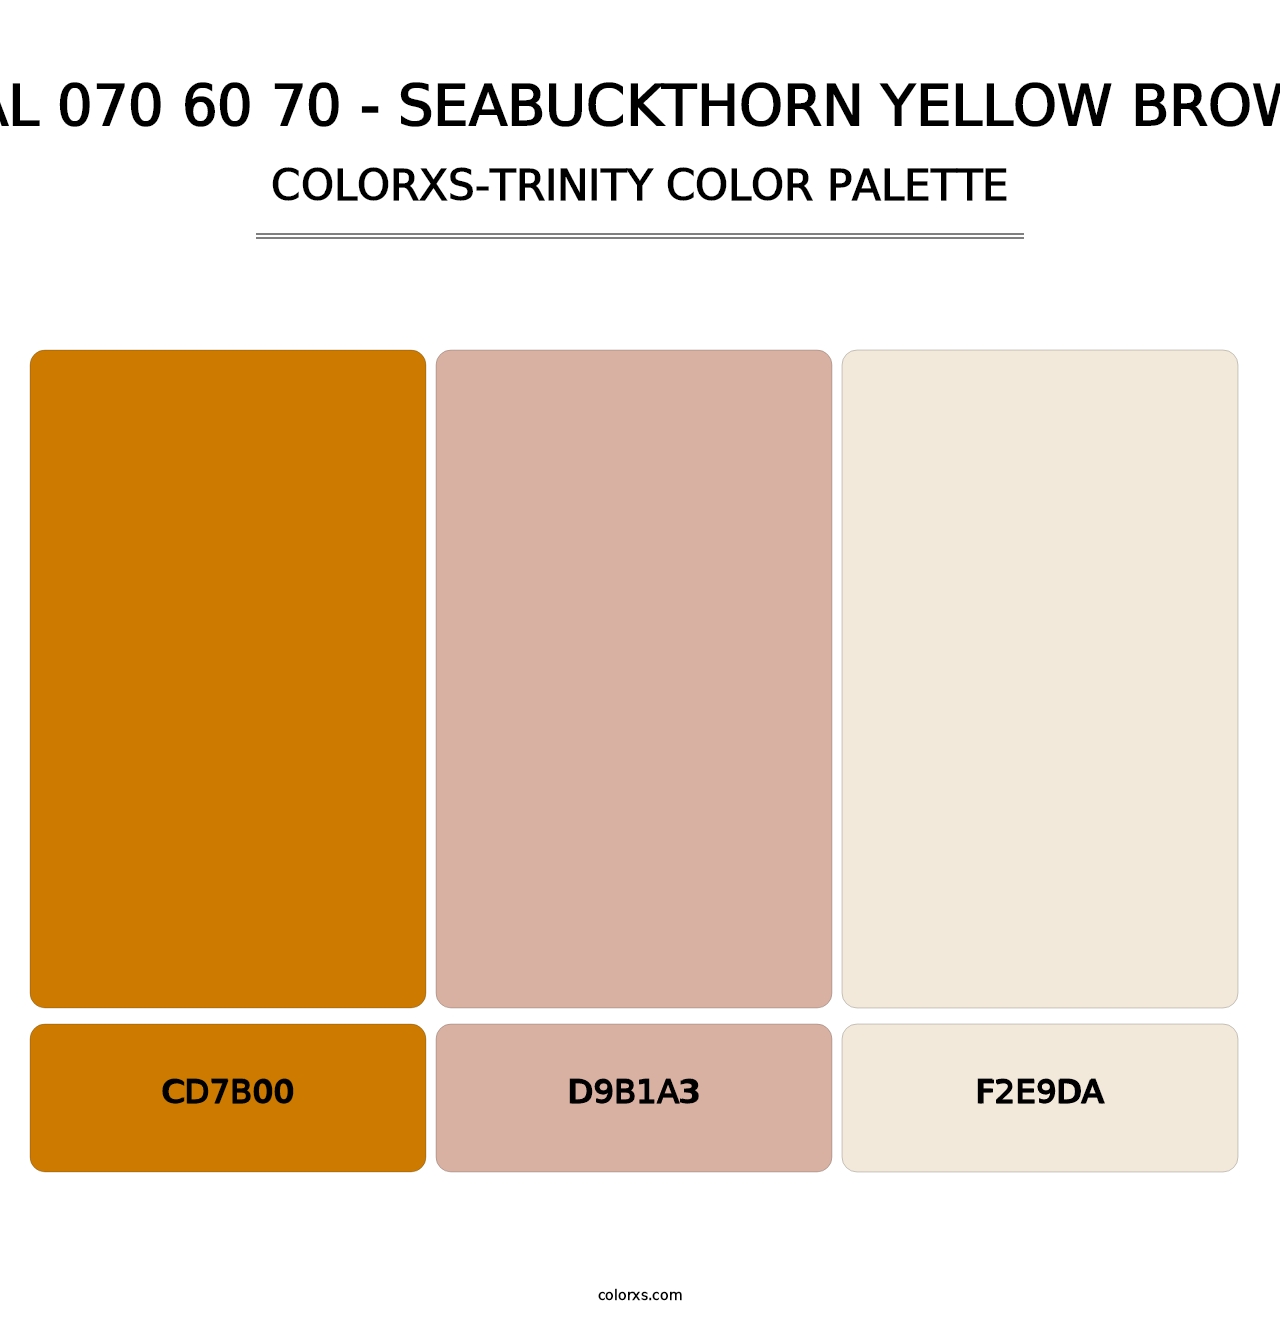 RAL 070 60 70 - Seabuckthorn Yellow Brown - Colorxs Trinity Palette